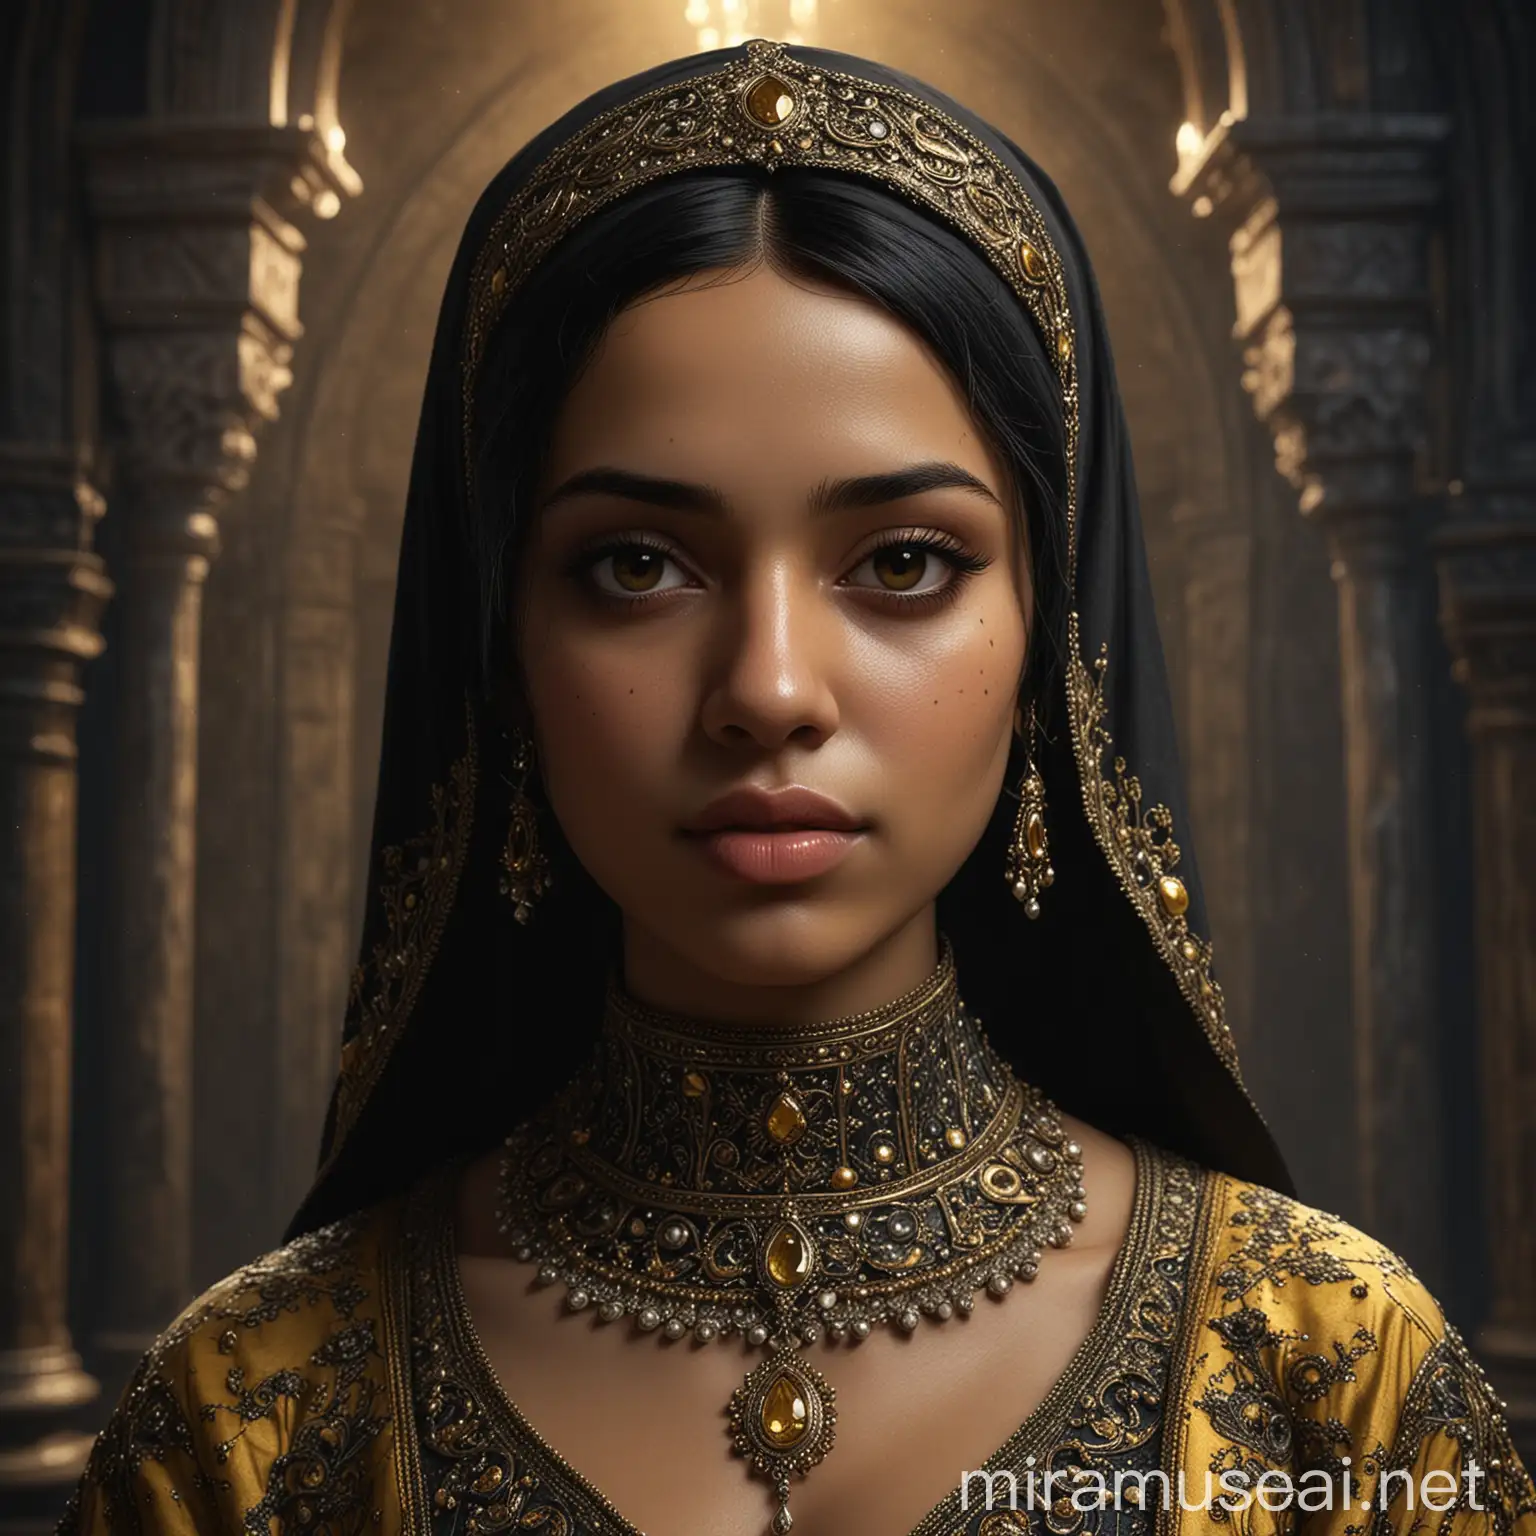 create a hyper-realistic, 8K image textured High-resolution portrait of  of a young woman, with thick black hair with hijab and  tan skin, dark eyes and full lips, a straight nose and arched eyebrows, wearing a black and yellow renaissance fully covered gown, decorated with gems and jewels, in a dark stone chamber background, medieval setting, , full body shot, atmospheric lighting, conceptual art style